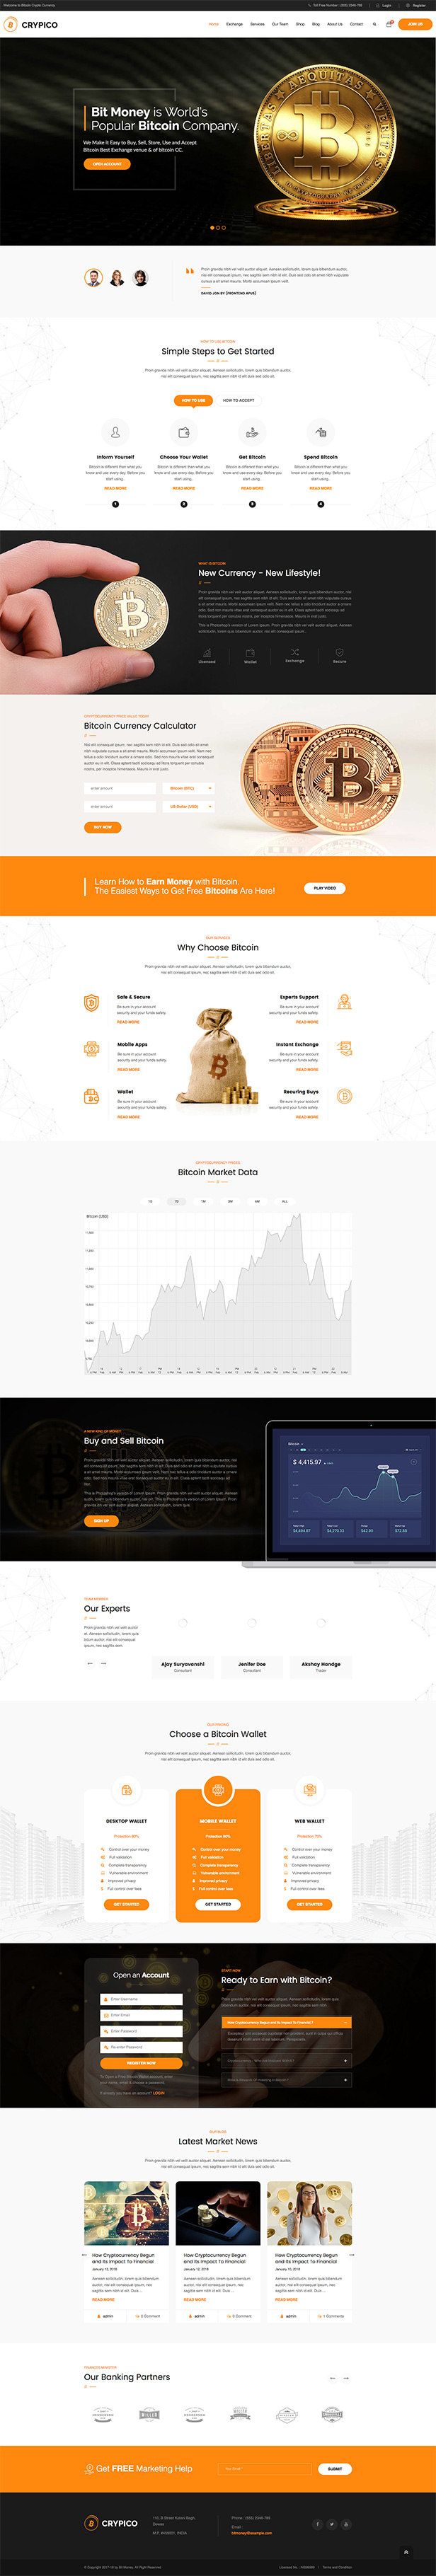 Download Crypico - Crypto Currency WordPress Theme Free Nulled